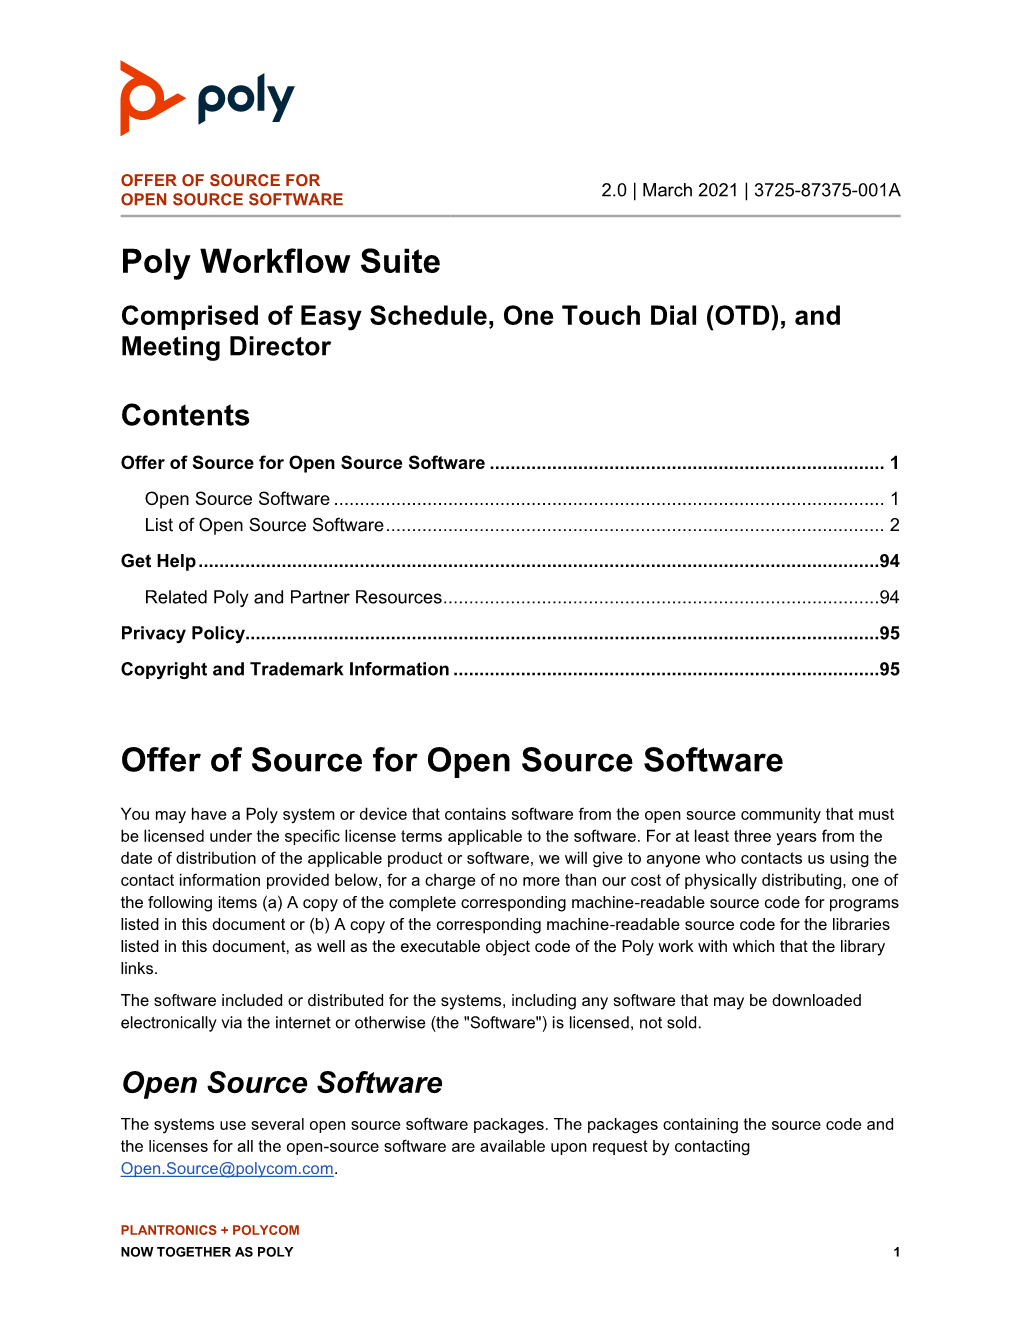 Workflow Suite Offer of Source for Open Source Software